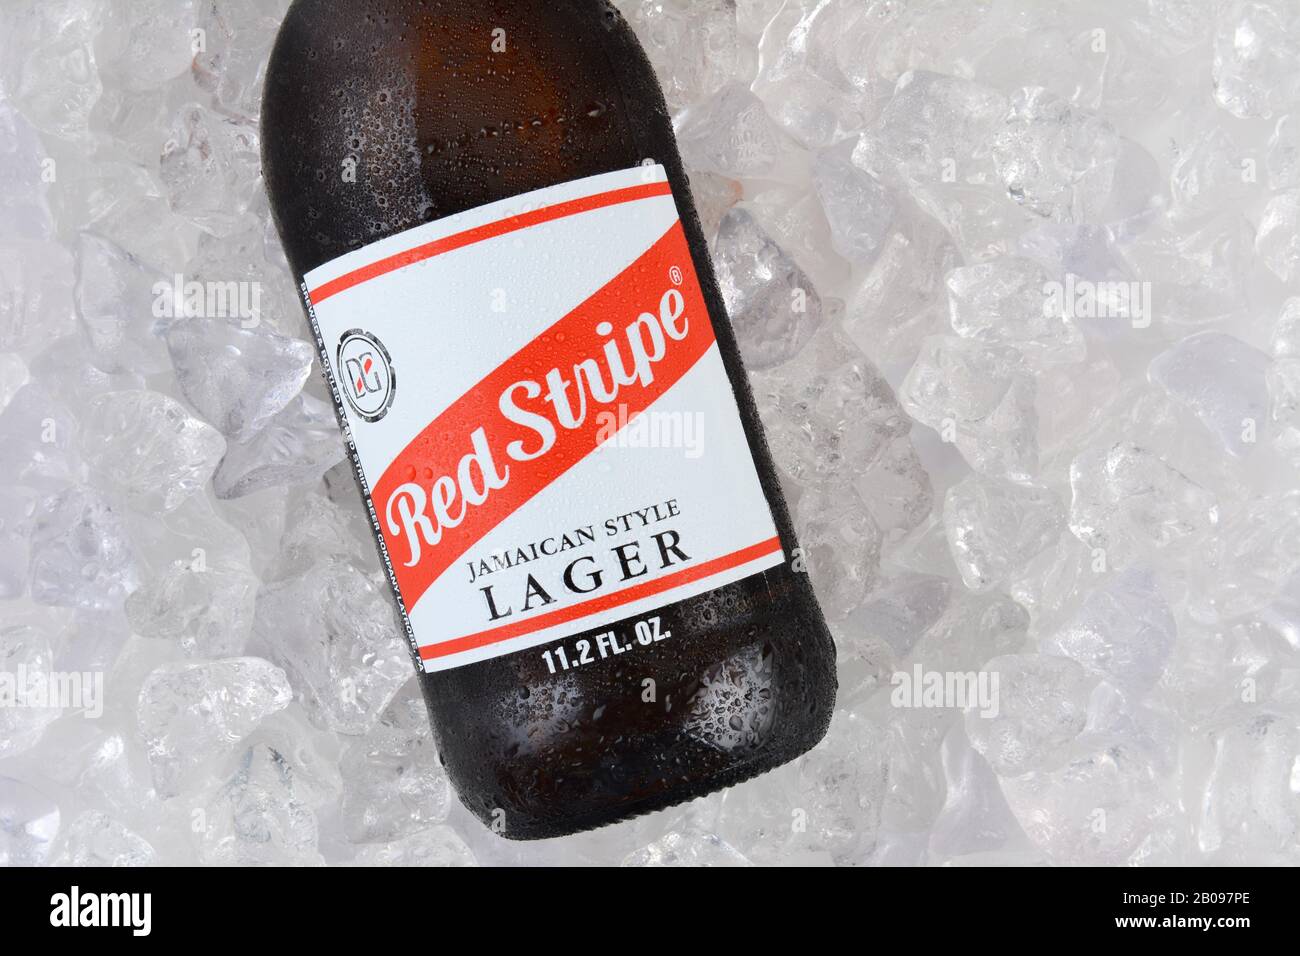 IRVINE, CA - JANUARY 11, 2015: Red Stripe Jamaican Style Lager on a bed of ice closeup. Brewed in Jamaica since 1938 by Desnoes & Geddes its internati Stock Photo